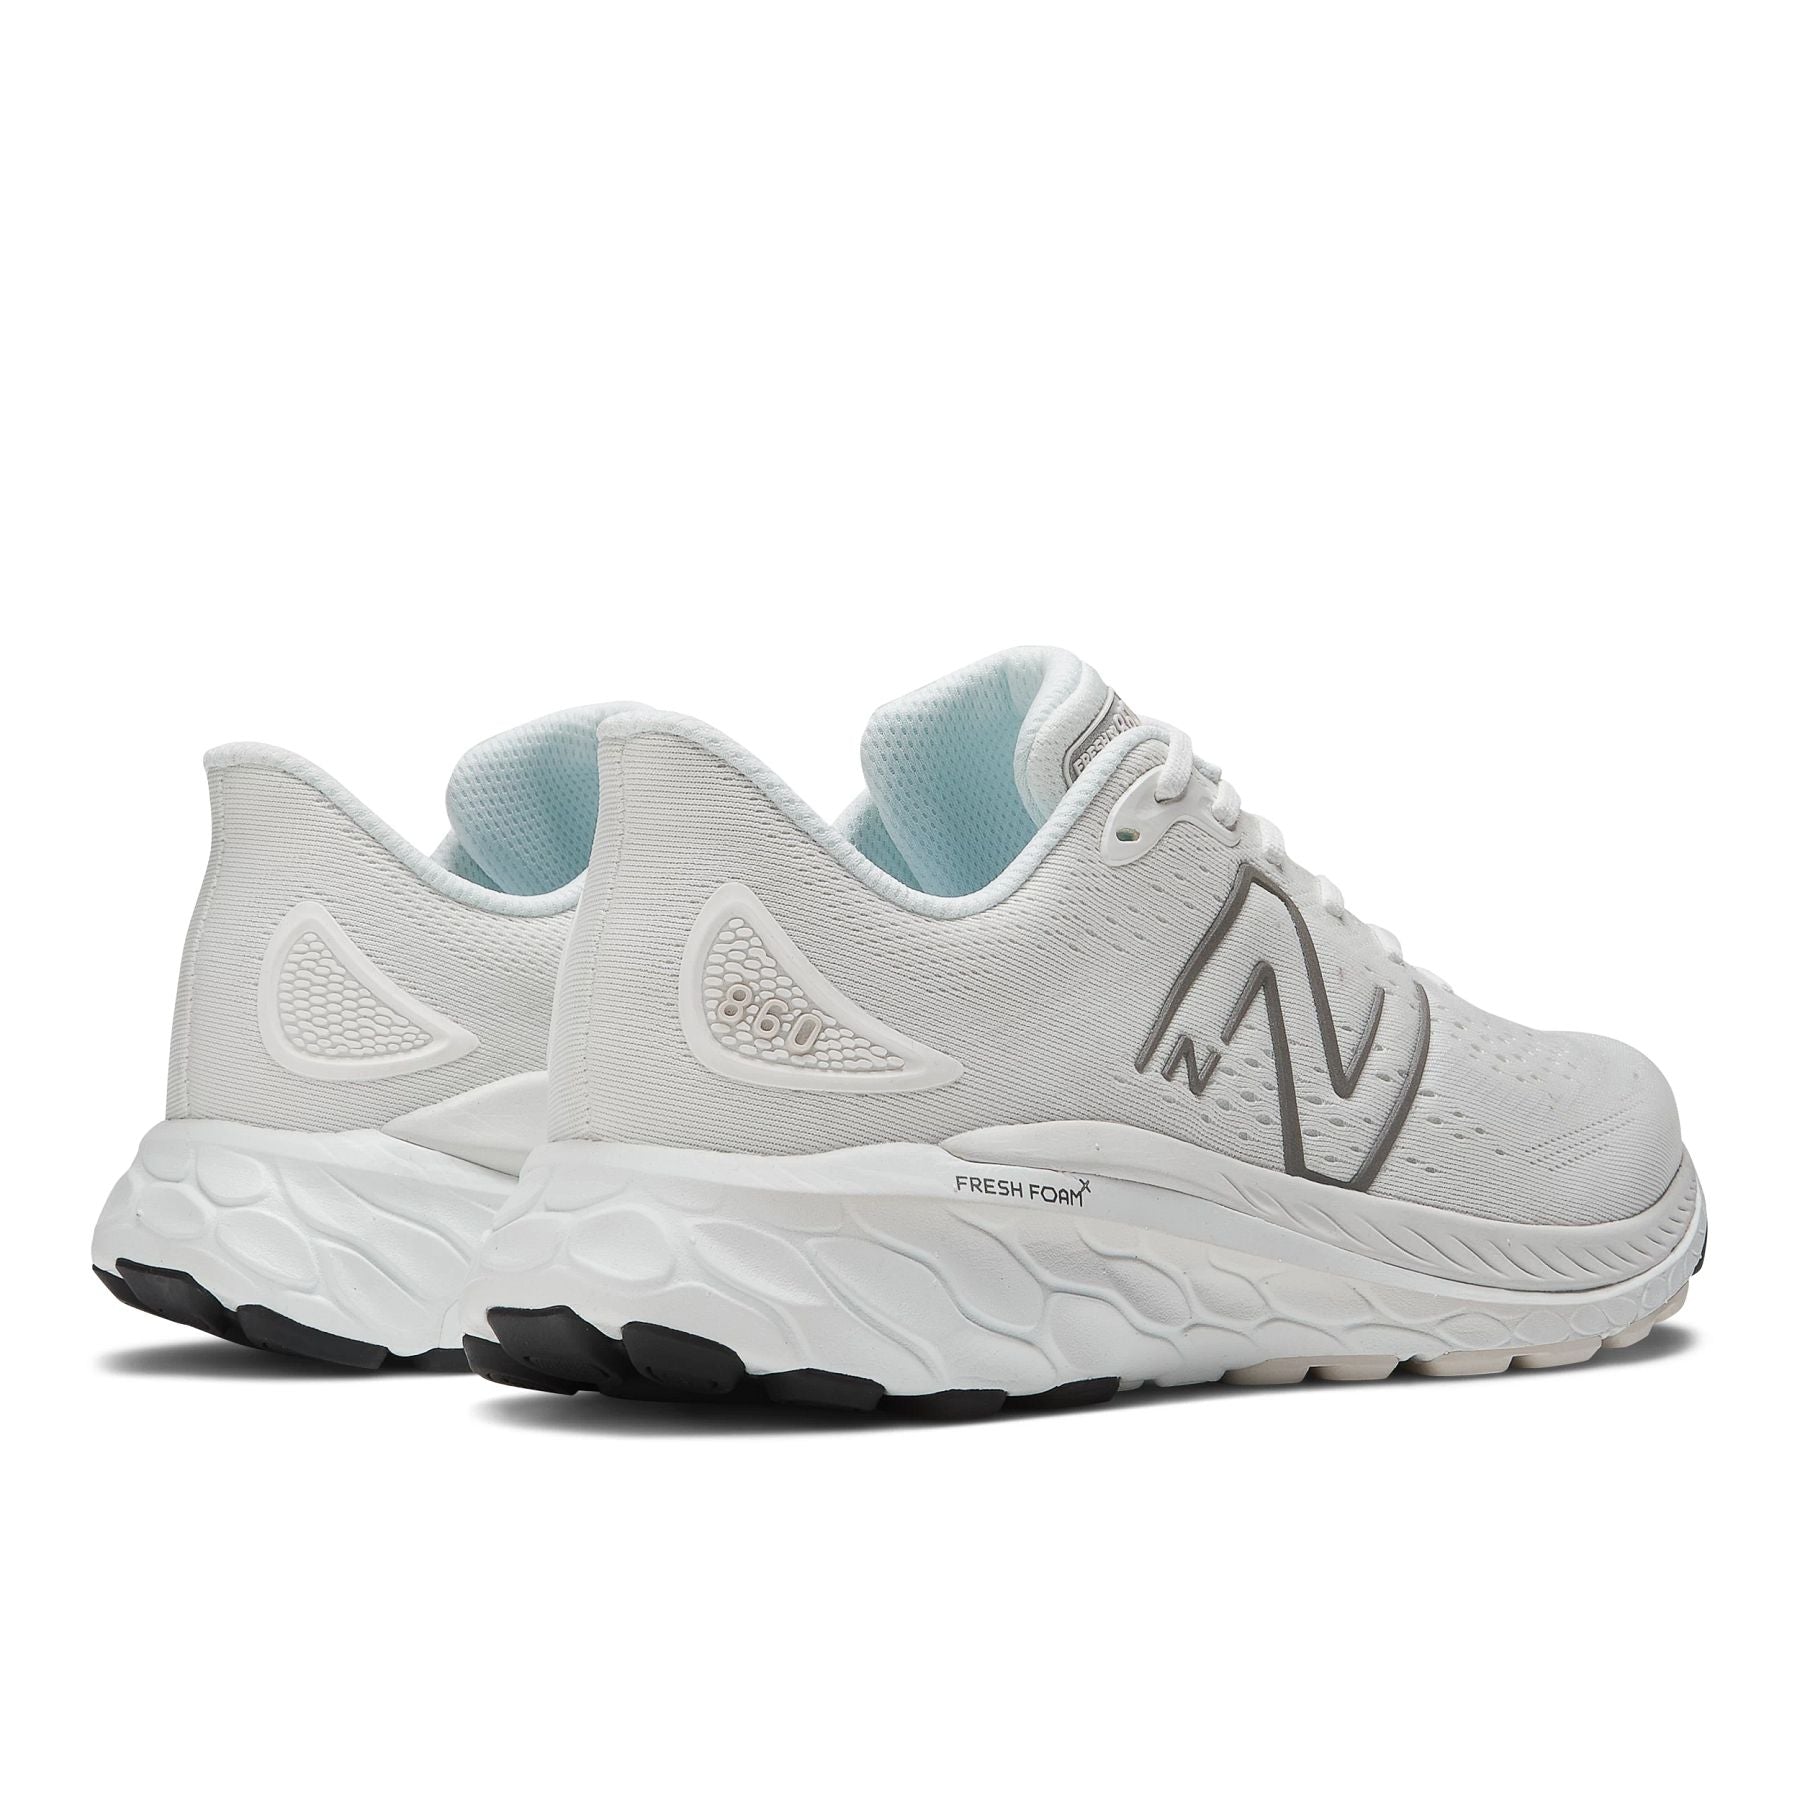 Back angled view of the Men's New Balance 860 V13 in the color White/Silver